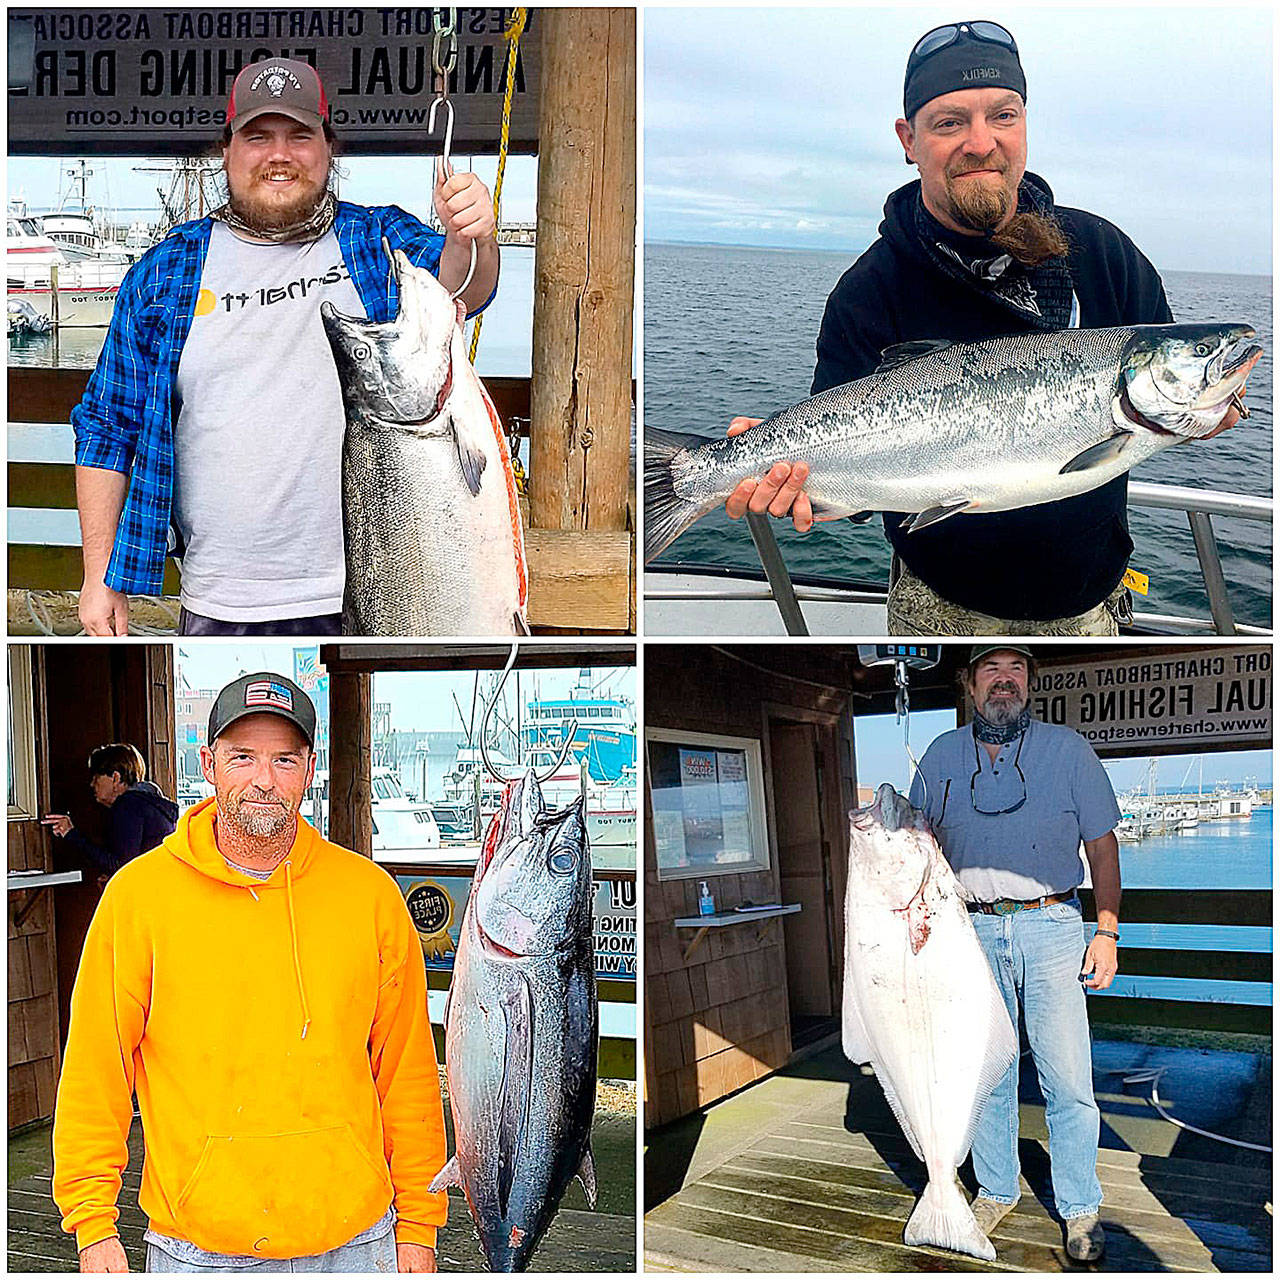 COURTESY WESTPORT WEIGHMASTER The 2020 Westport Charterboat Association derby winners, clockwise from top left: Robert Inslee of East Wenatchee with a 32.2-pound Chinook caught aboard the Predator; Ken Sheaffer of Milton with a 12.45-pound coho caught aboard the Tequila Too; Keith Nelson of Tulalip with a 63.90-pound halibut caught aboard the Angler; and Sean Gomez of Spokane with a 32.9-pound albacore tuna caught aboard the Blue Eyes.